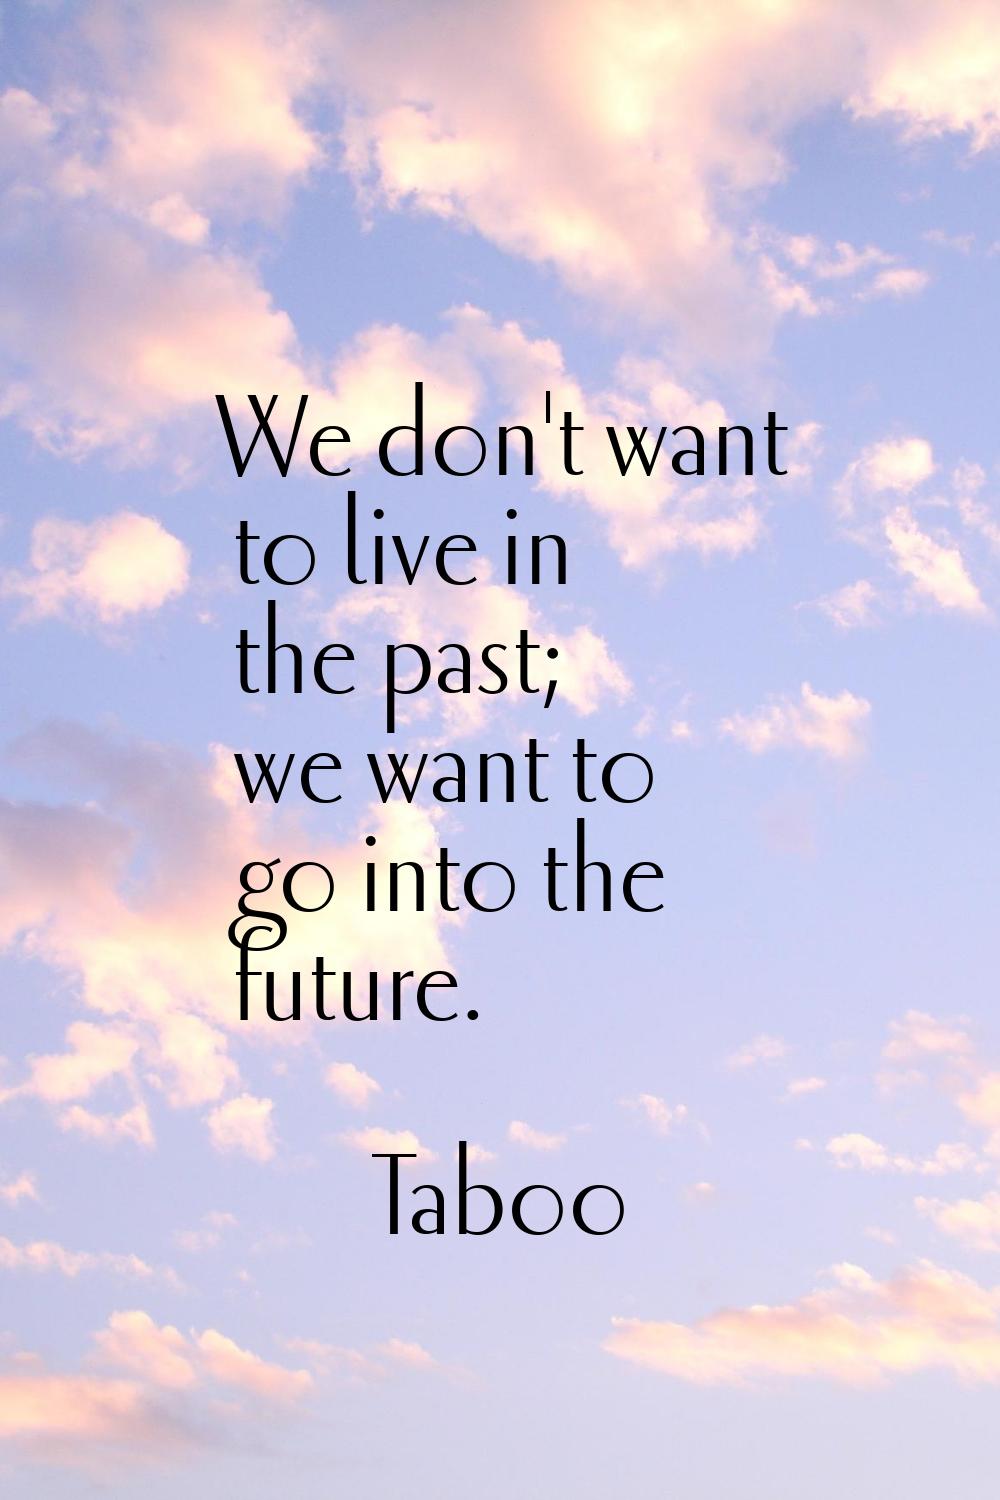 We don't want to live in the past; we want to go into the future.